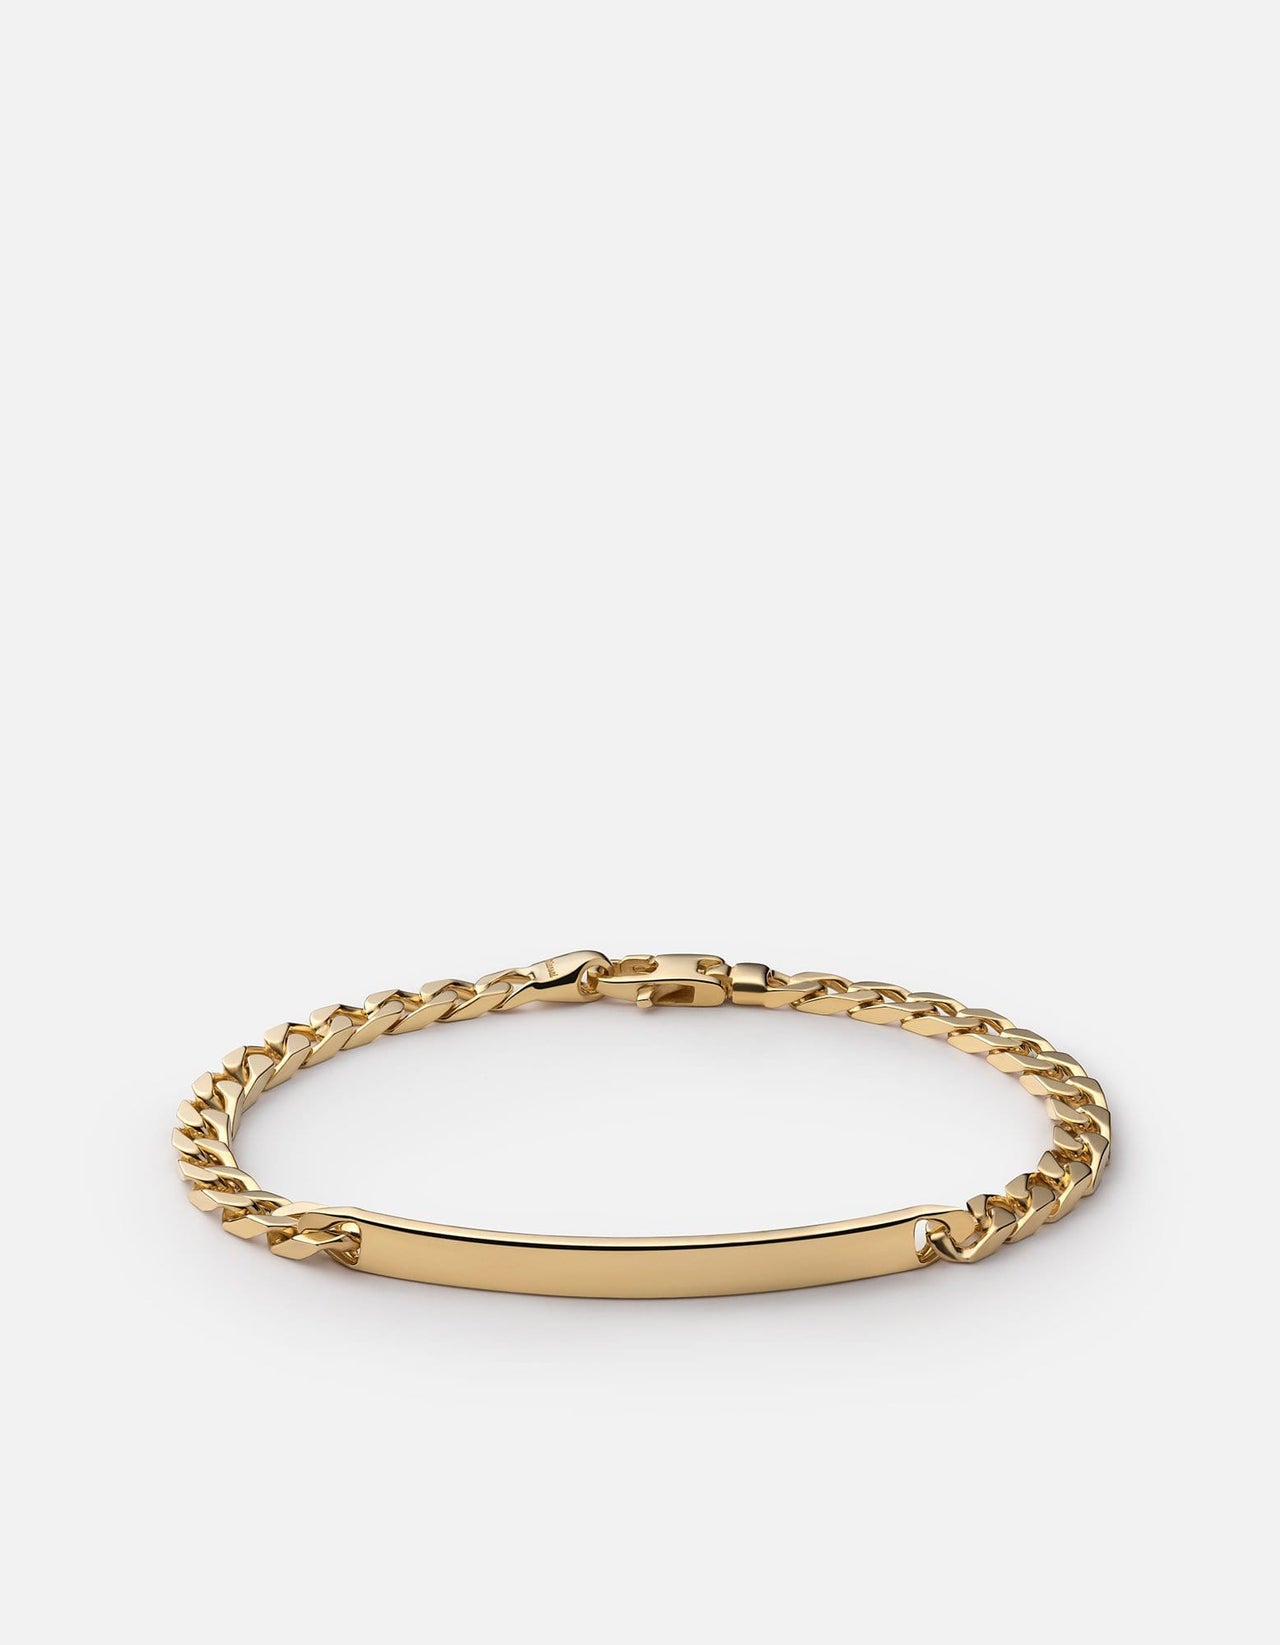 Make A Chain|14k Gold-plated Wheat Chain Bracelet Component - Adjustable  Zircon Beads